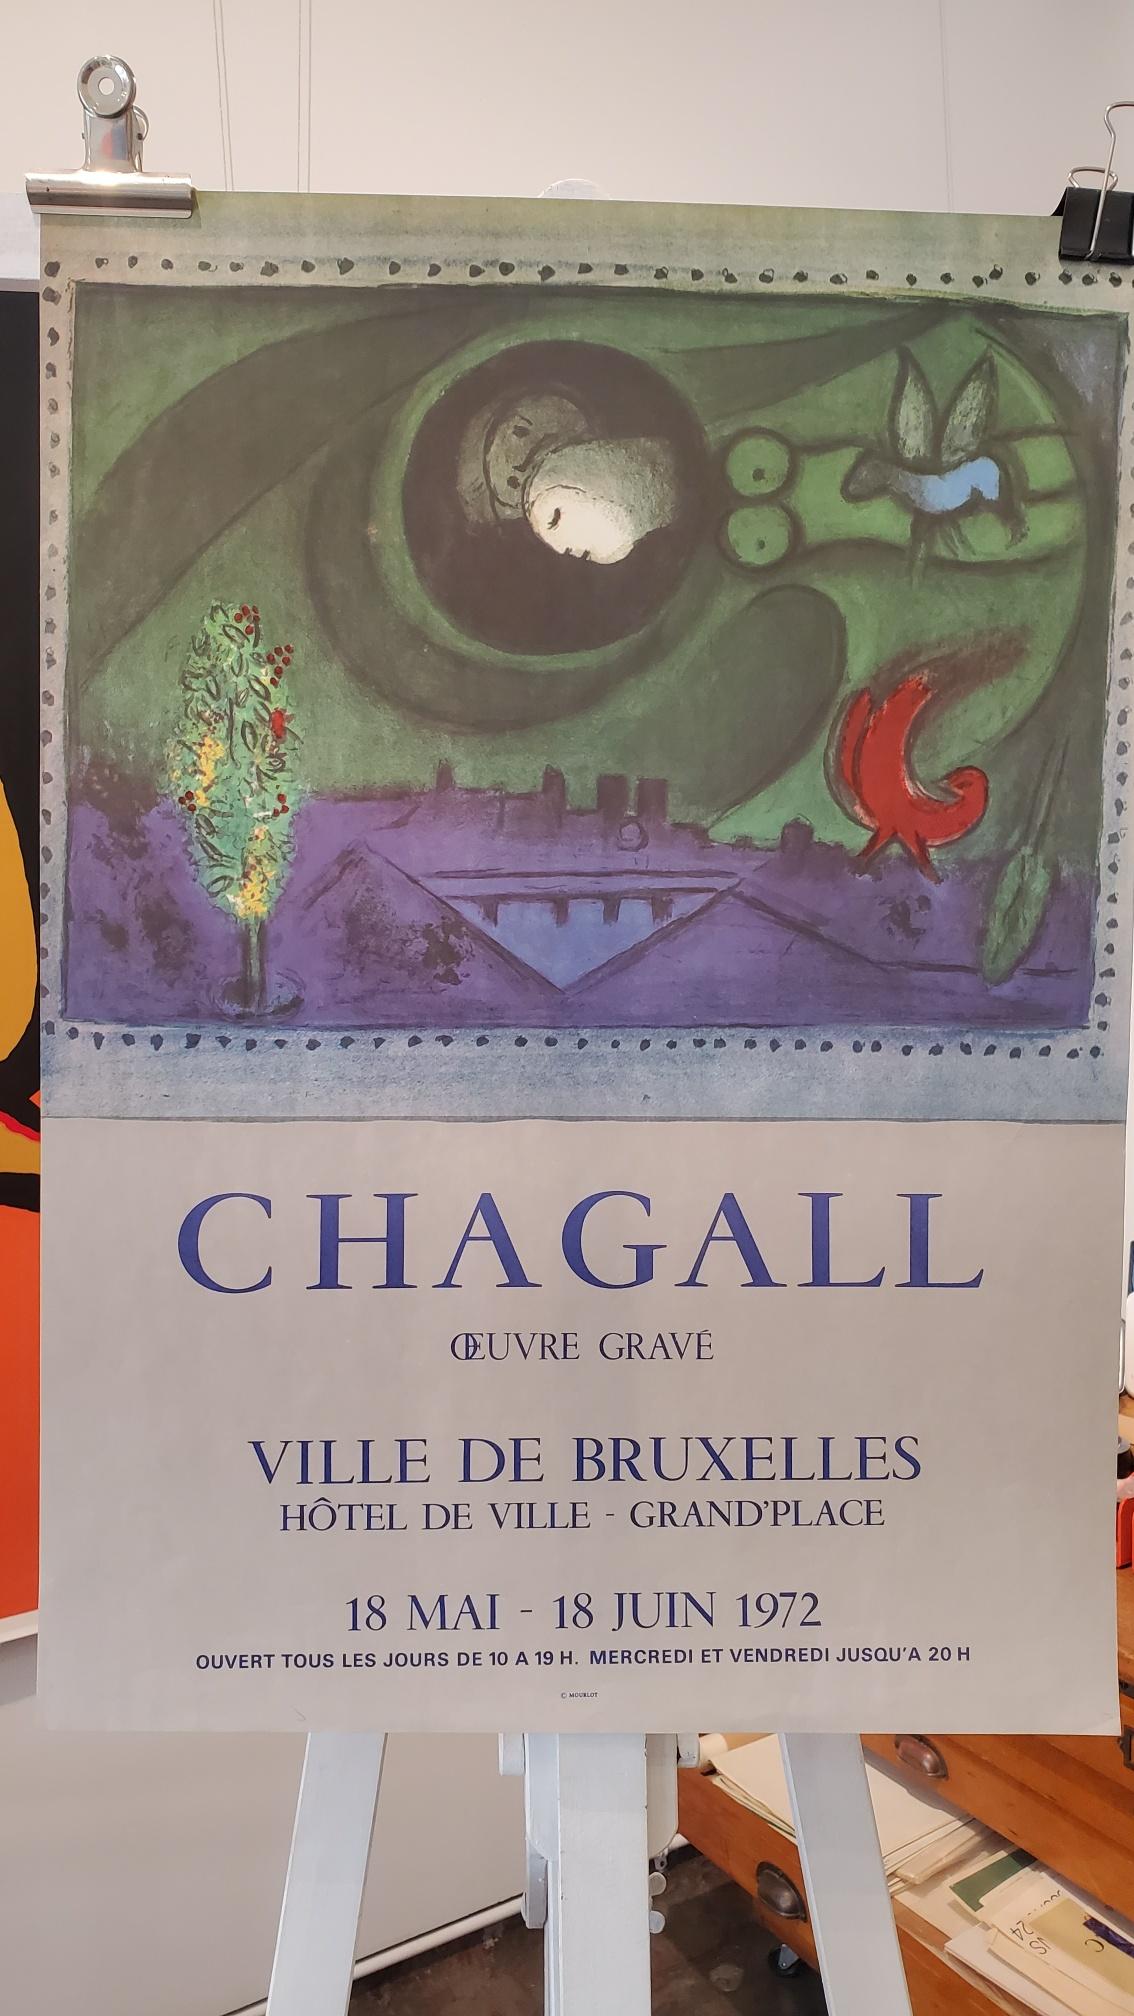 This is a beautiful exhibition poster from 1972, the poster is in good condition and colours and condition are consitent to 

ARTIST	
Chagall

FORMAT	
Un-linen backed

YEAR	
1972

